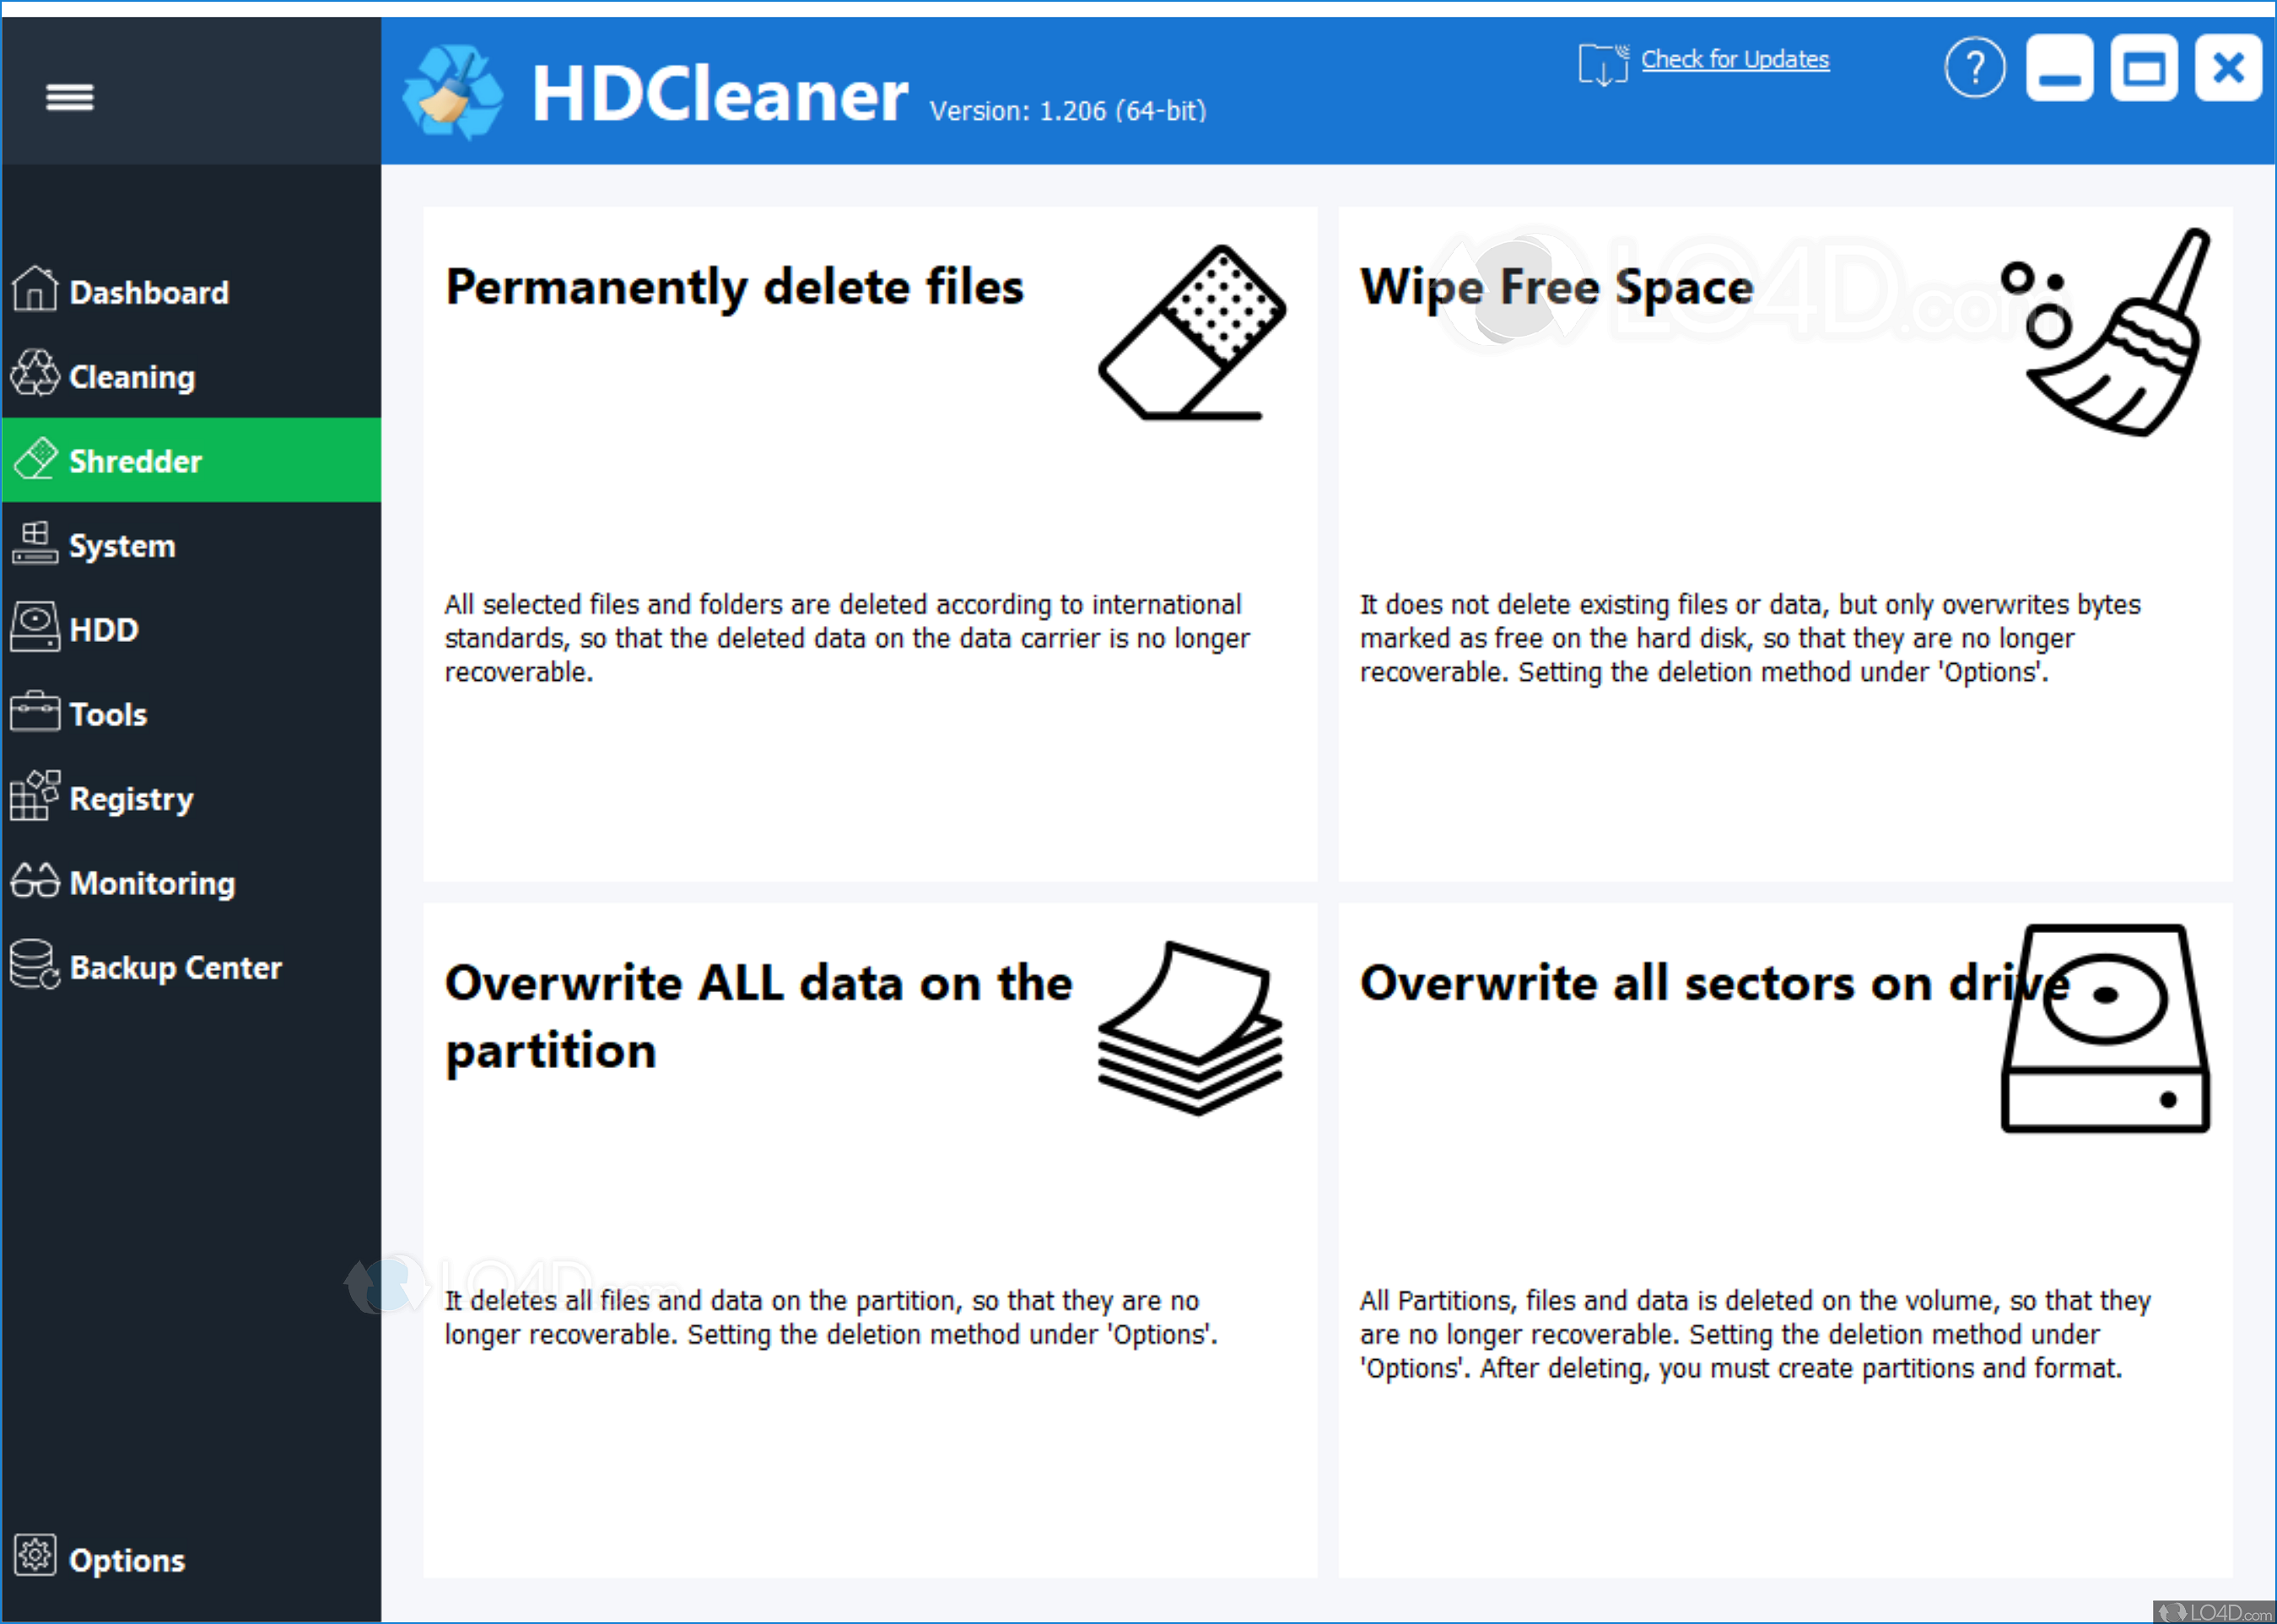 HDCleaner 2.060 instal the new